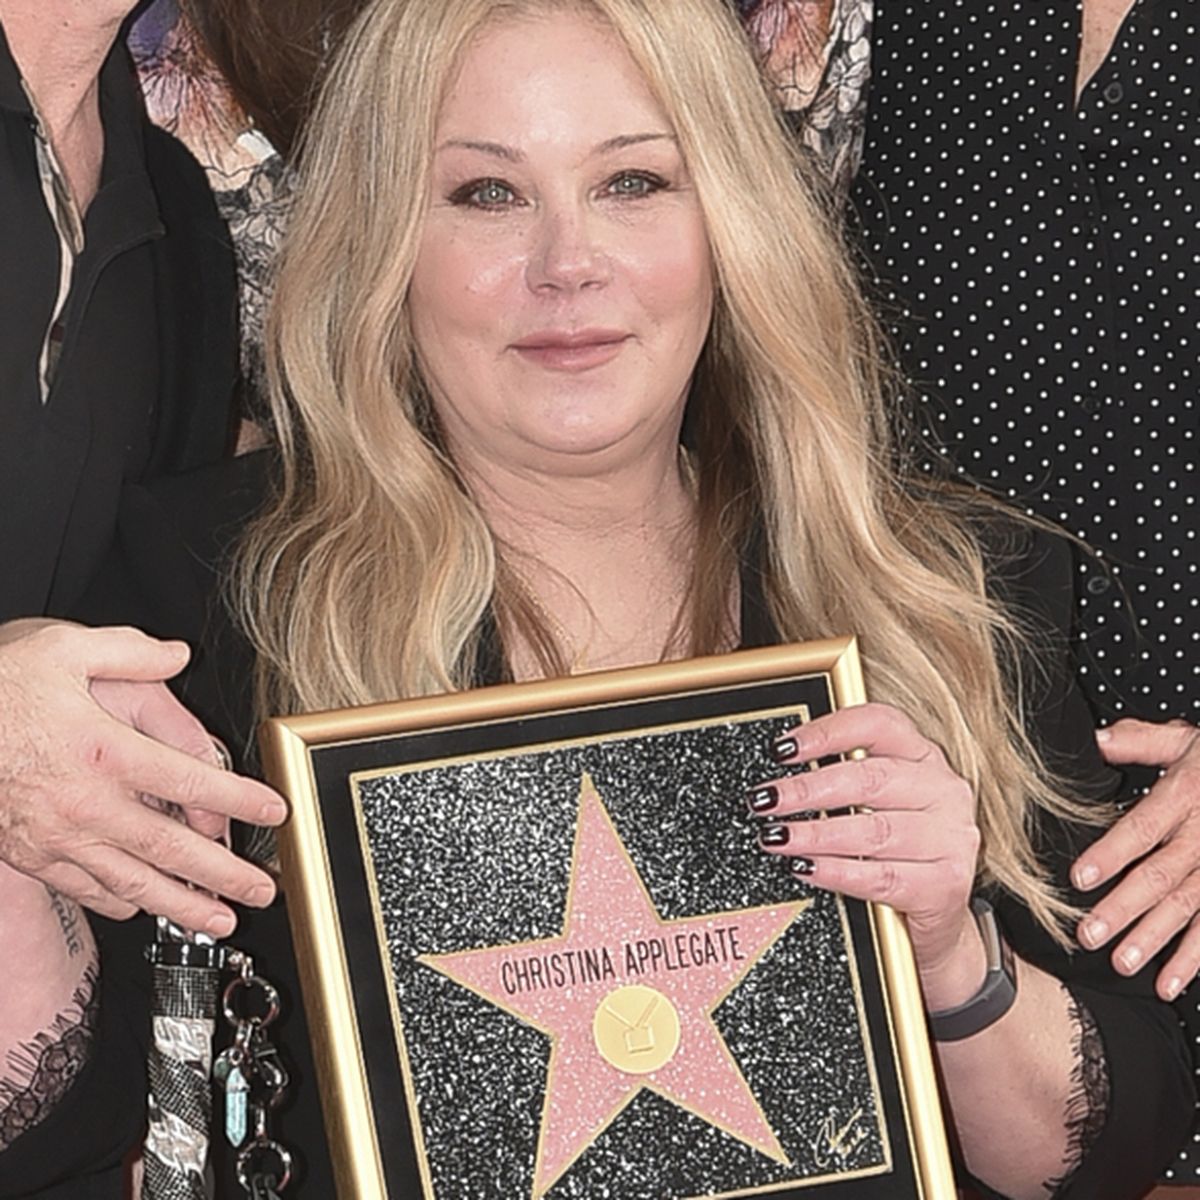 Christina Applegate Milf Porn - Christina Applegate makes first appearance since MS diagnosis to receive  Hollywood Walk of Fame star - 9Celebrity